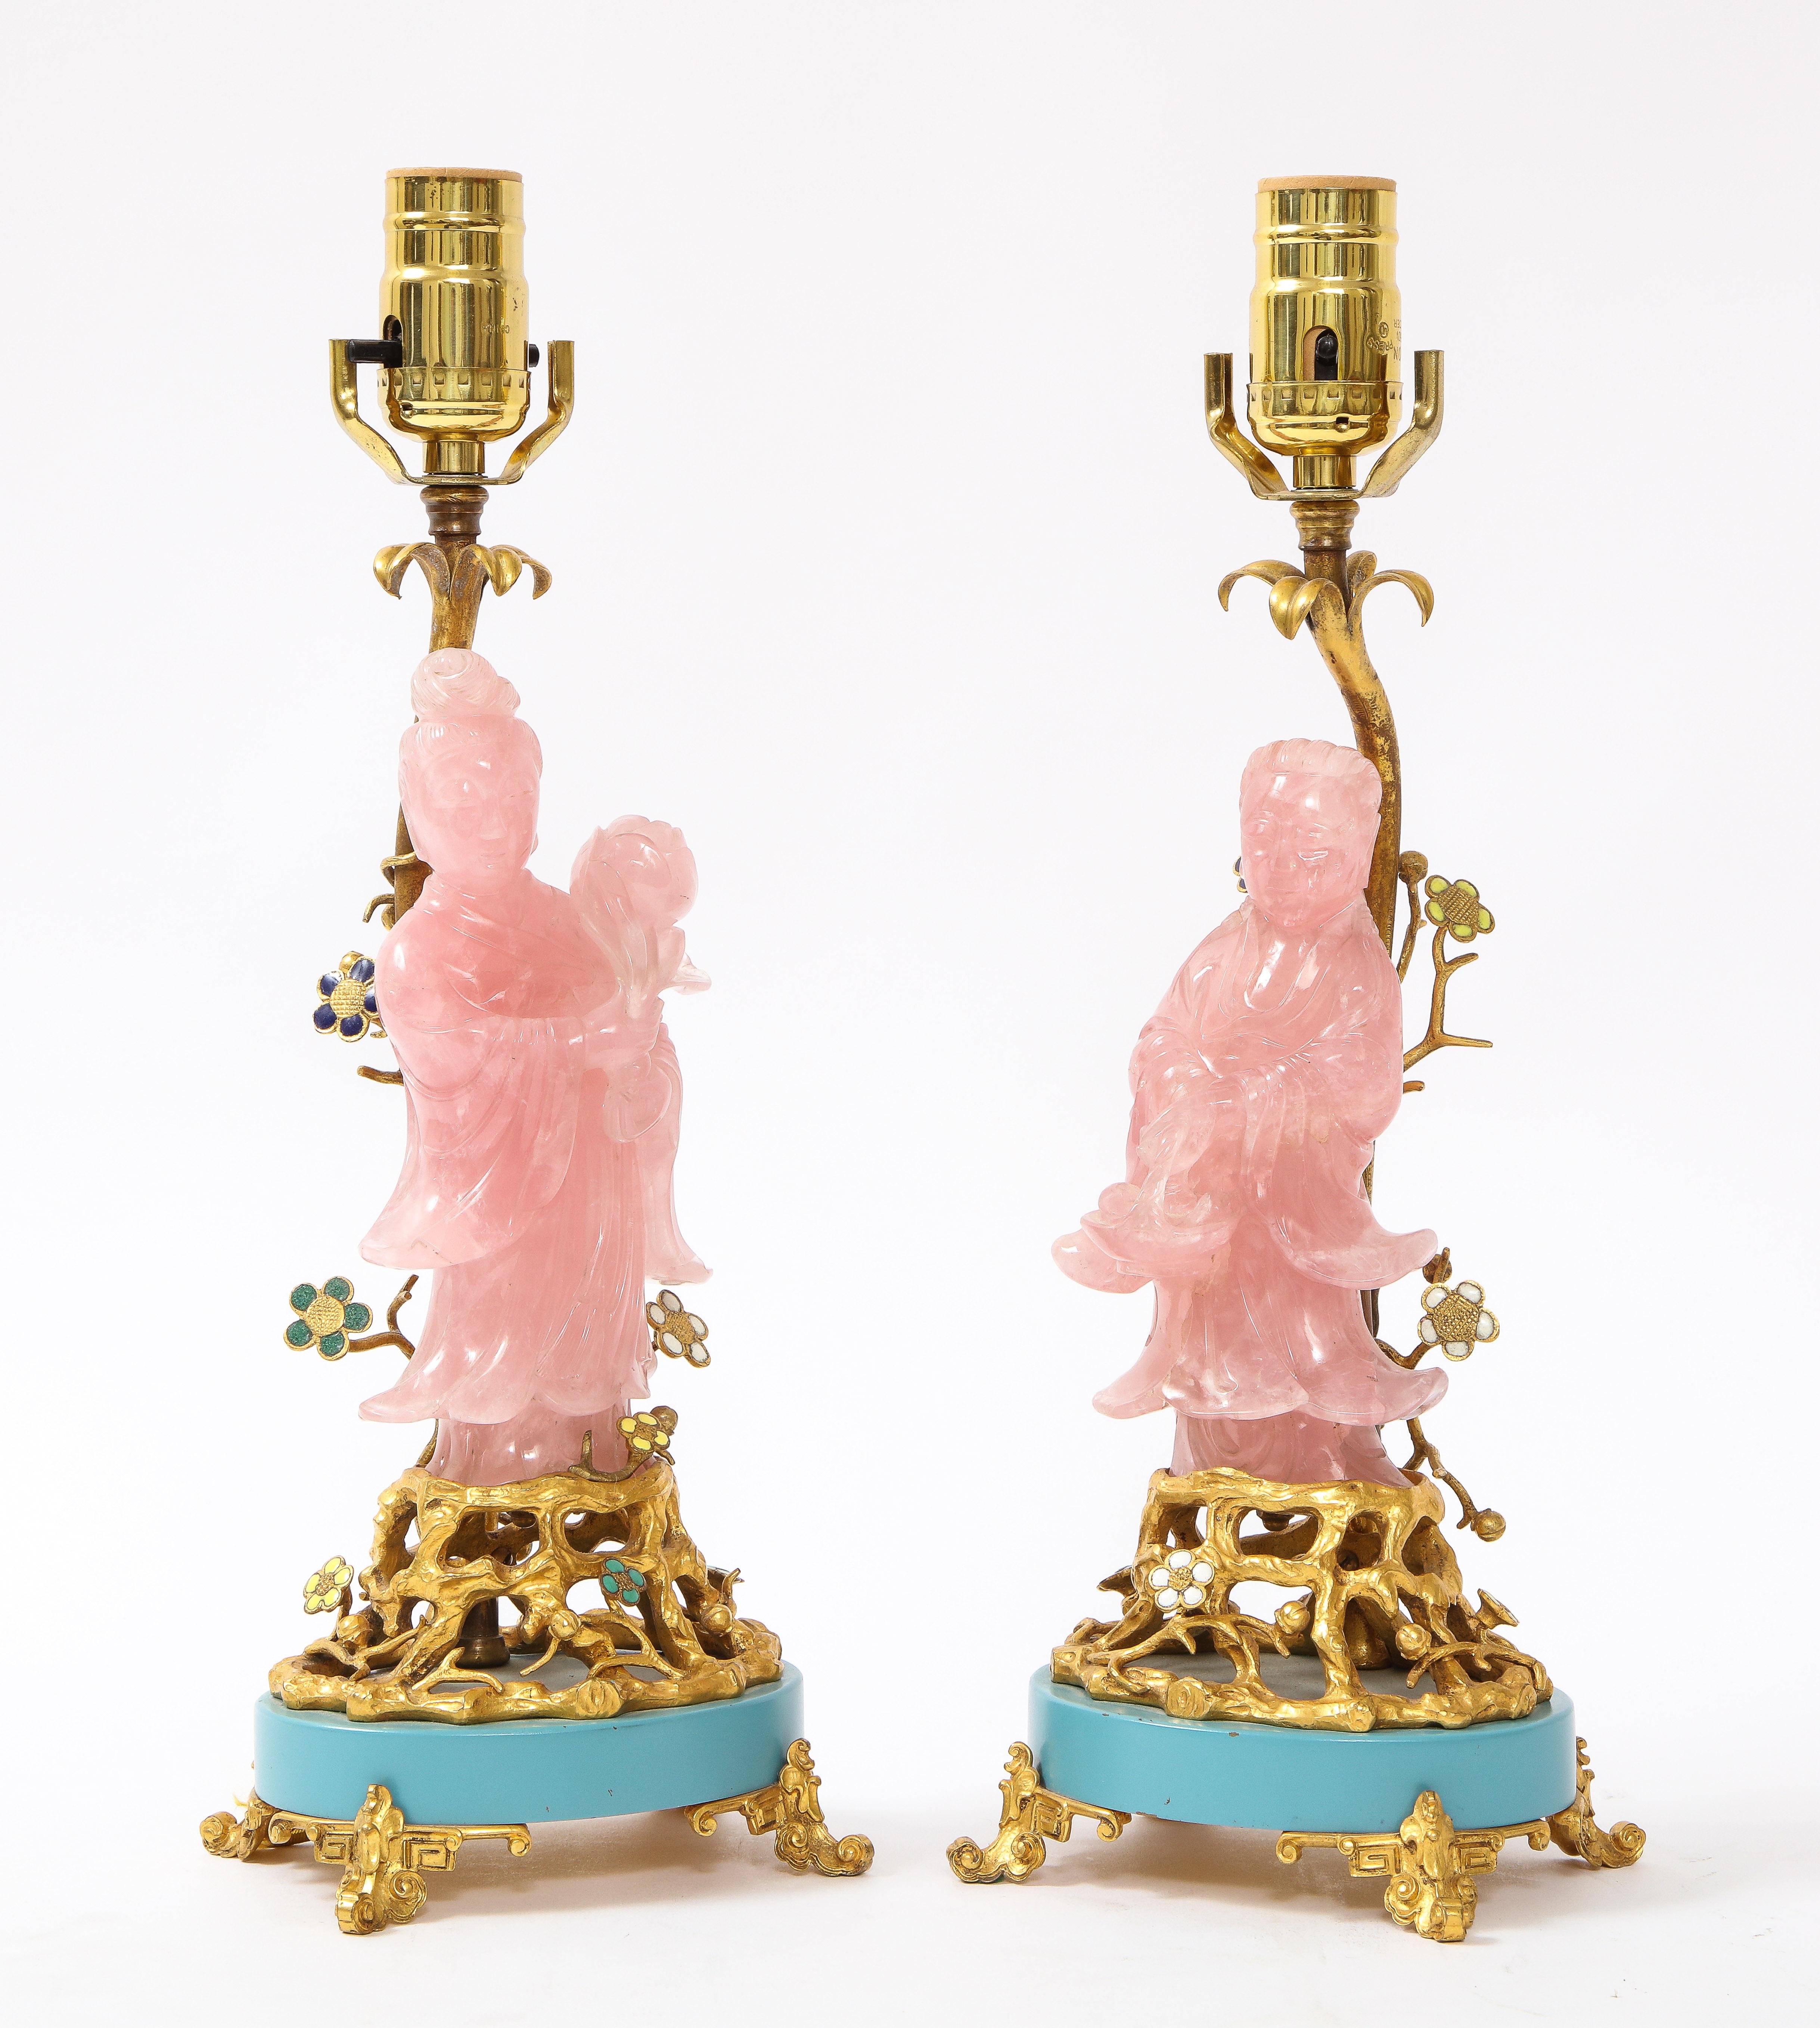 A fantastic pair of marked E. F. Caldwell and Co. Louis XVI style dore bronze mounted hand-carved rose quartz and enamel table lamps. Mounted on two dore bronze open work bases with blue enamel decoration and dore bronze Asian inspired feet are two